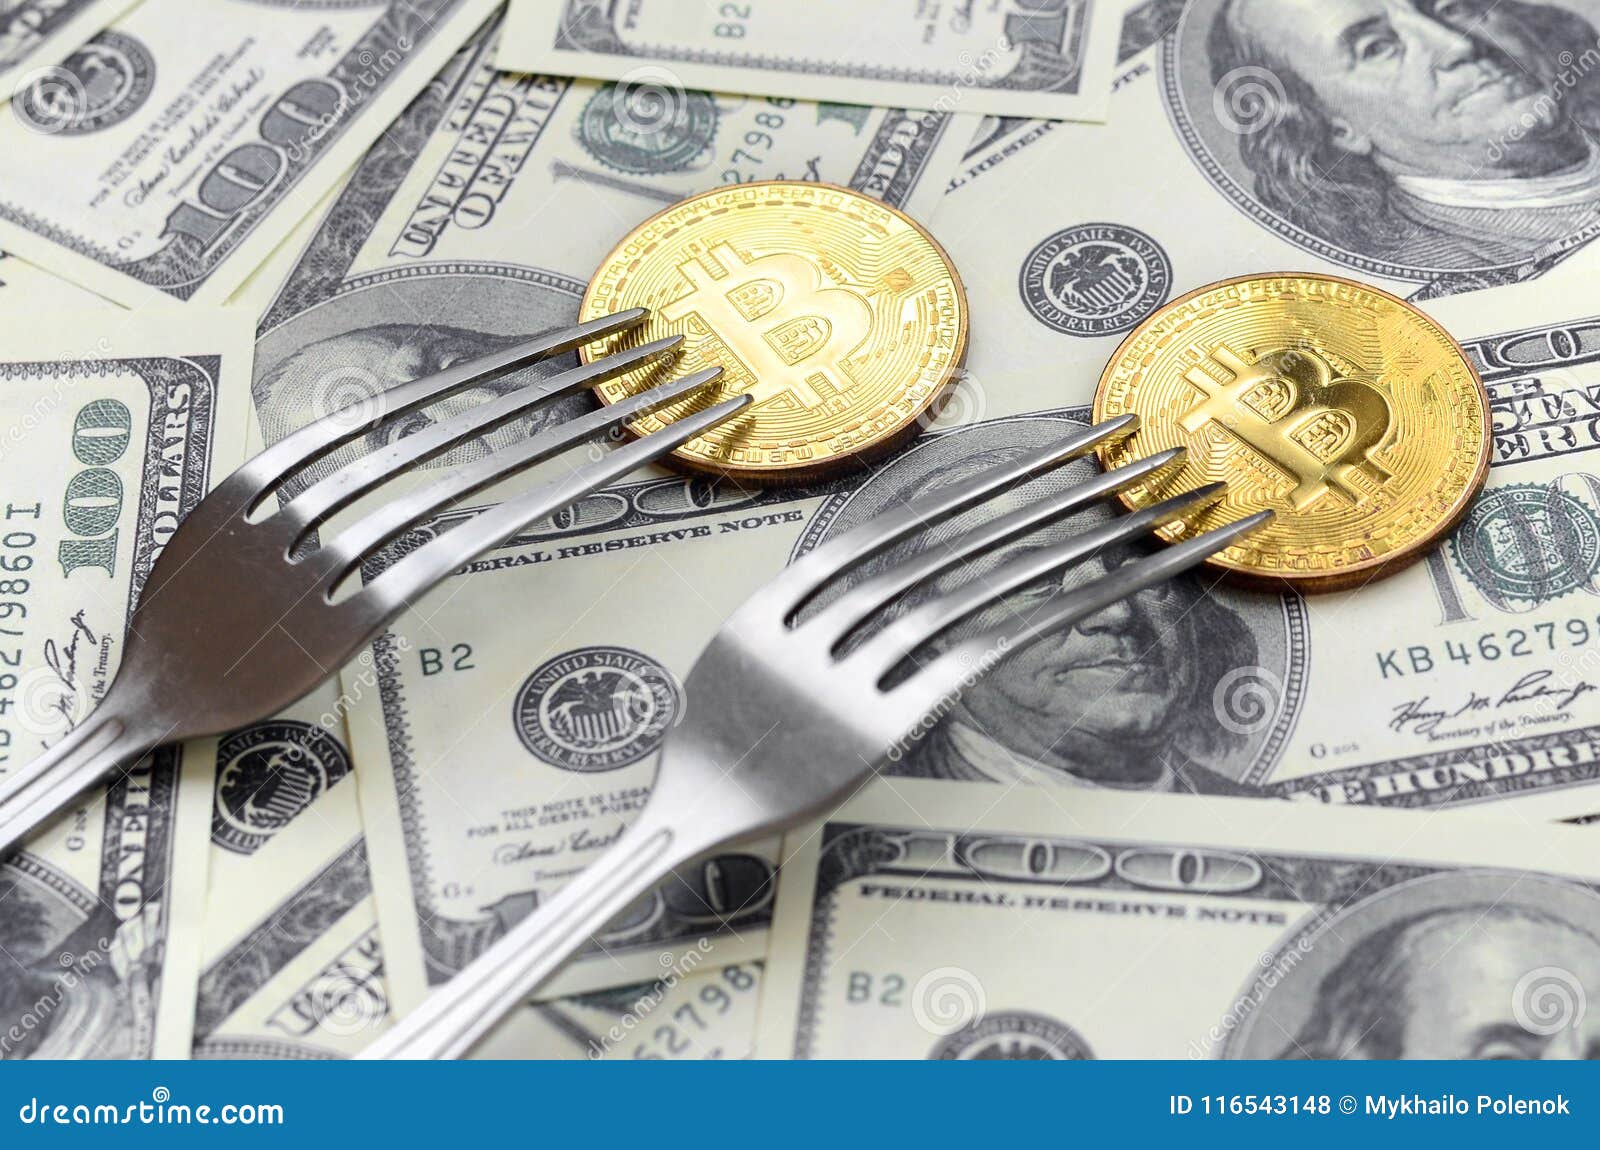 Bitcoin Getting New Hard Fork Change Physical Golden Crytocurrency - 